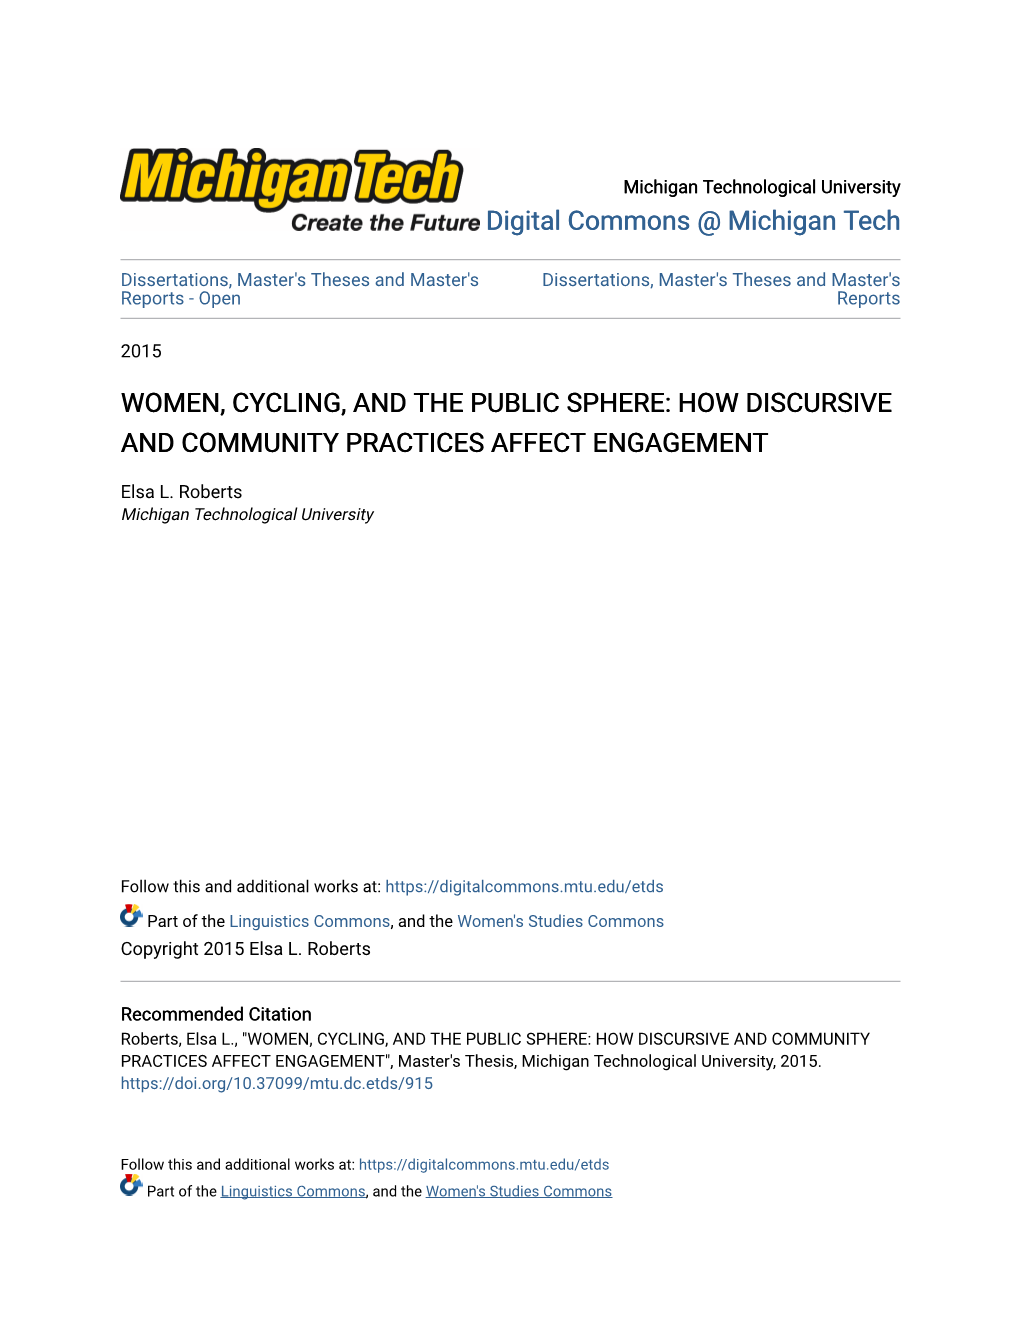 Women, Cycling, and the Public Sphere: How Discursive and Community Practices Affect Engagement